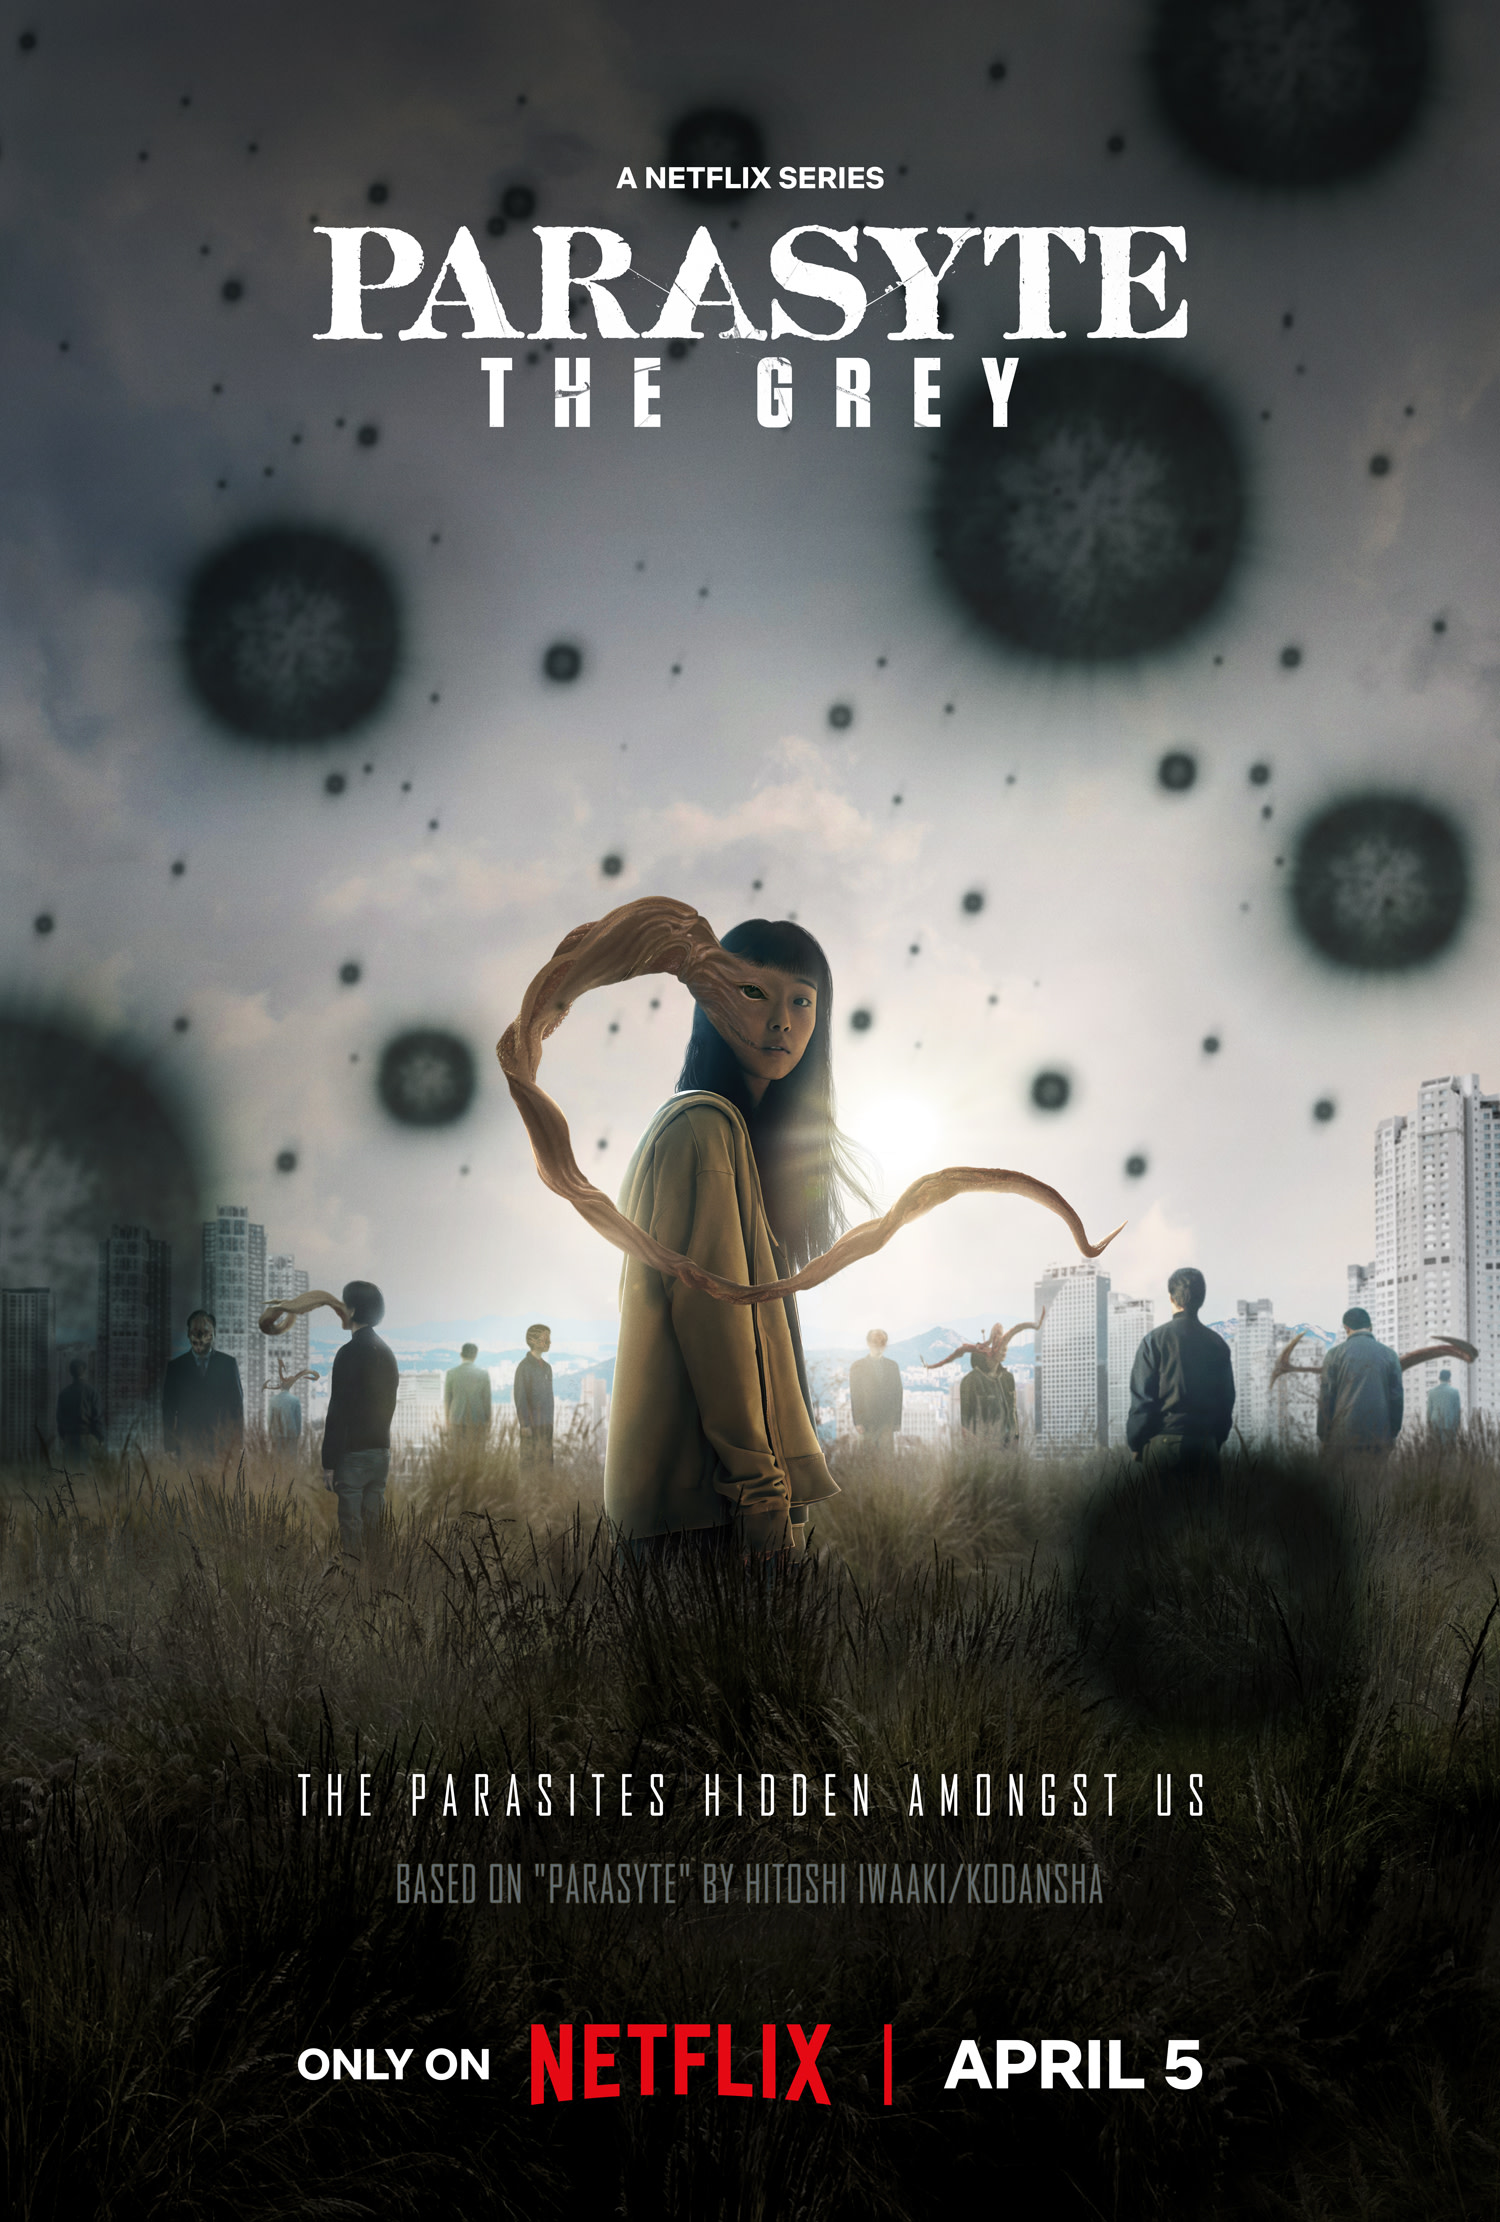 Behind the Scenes: Inside The Immersive Universe Of ‘Parasyte: The Grey’